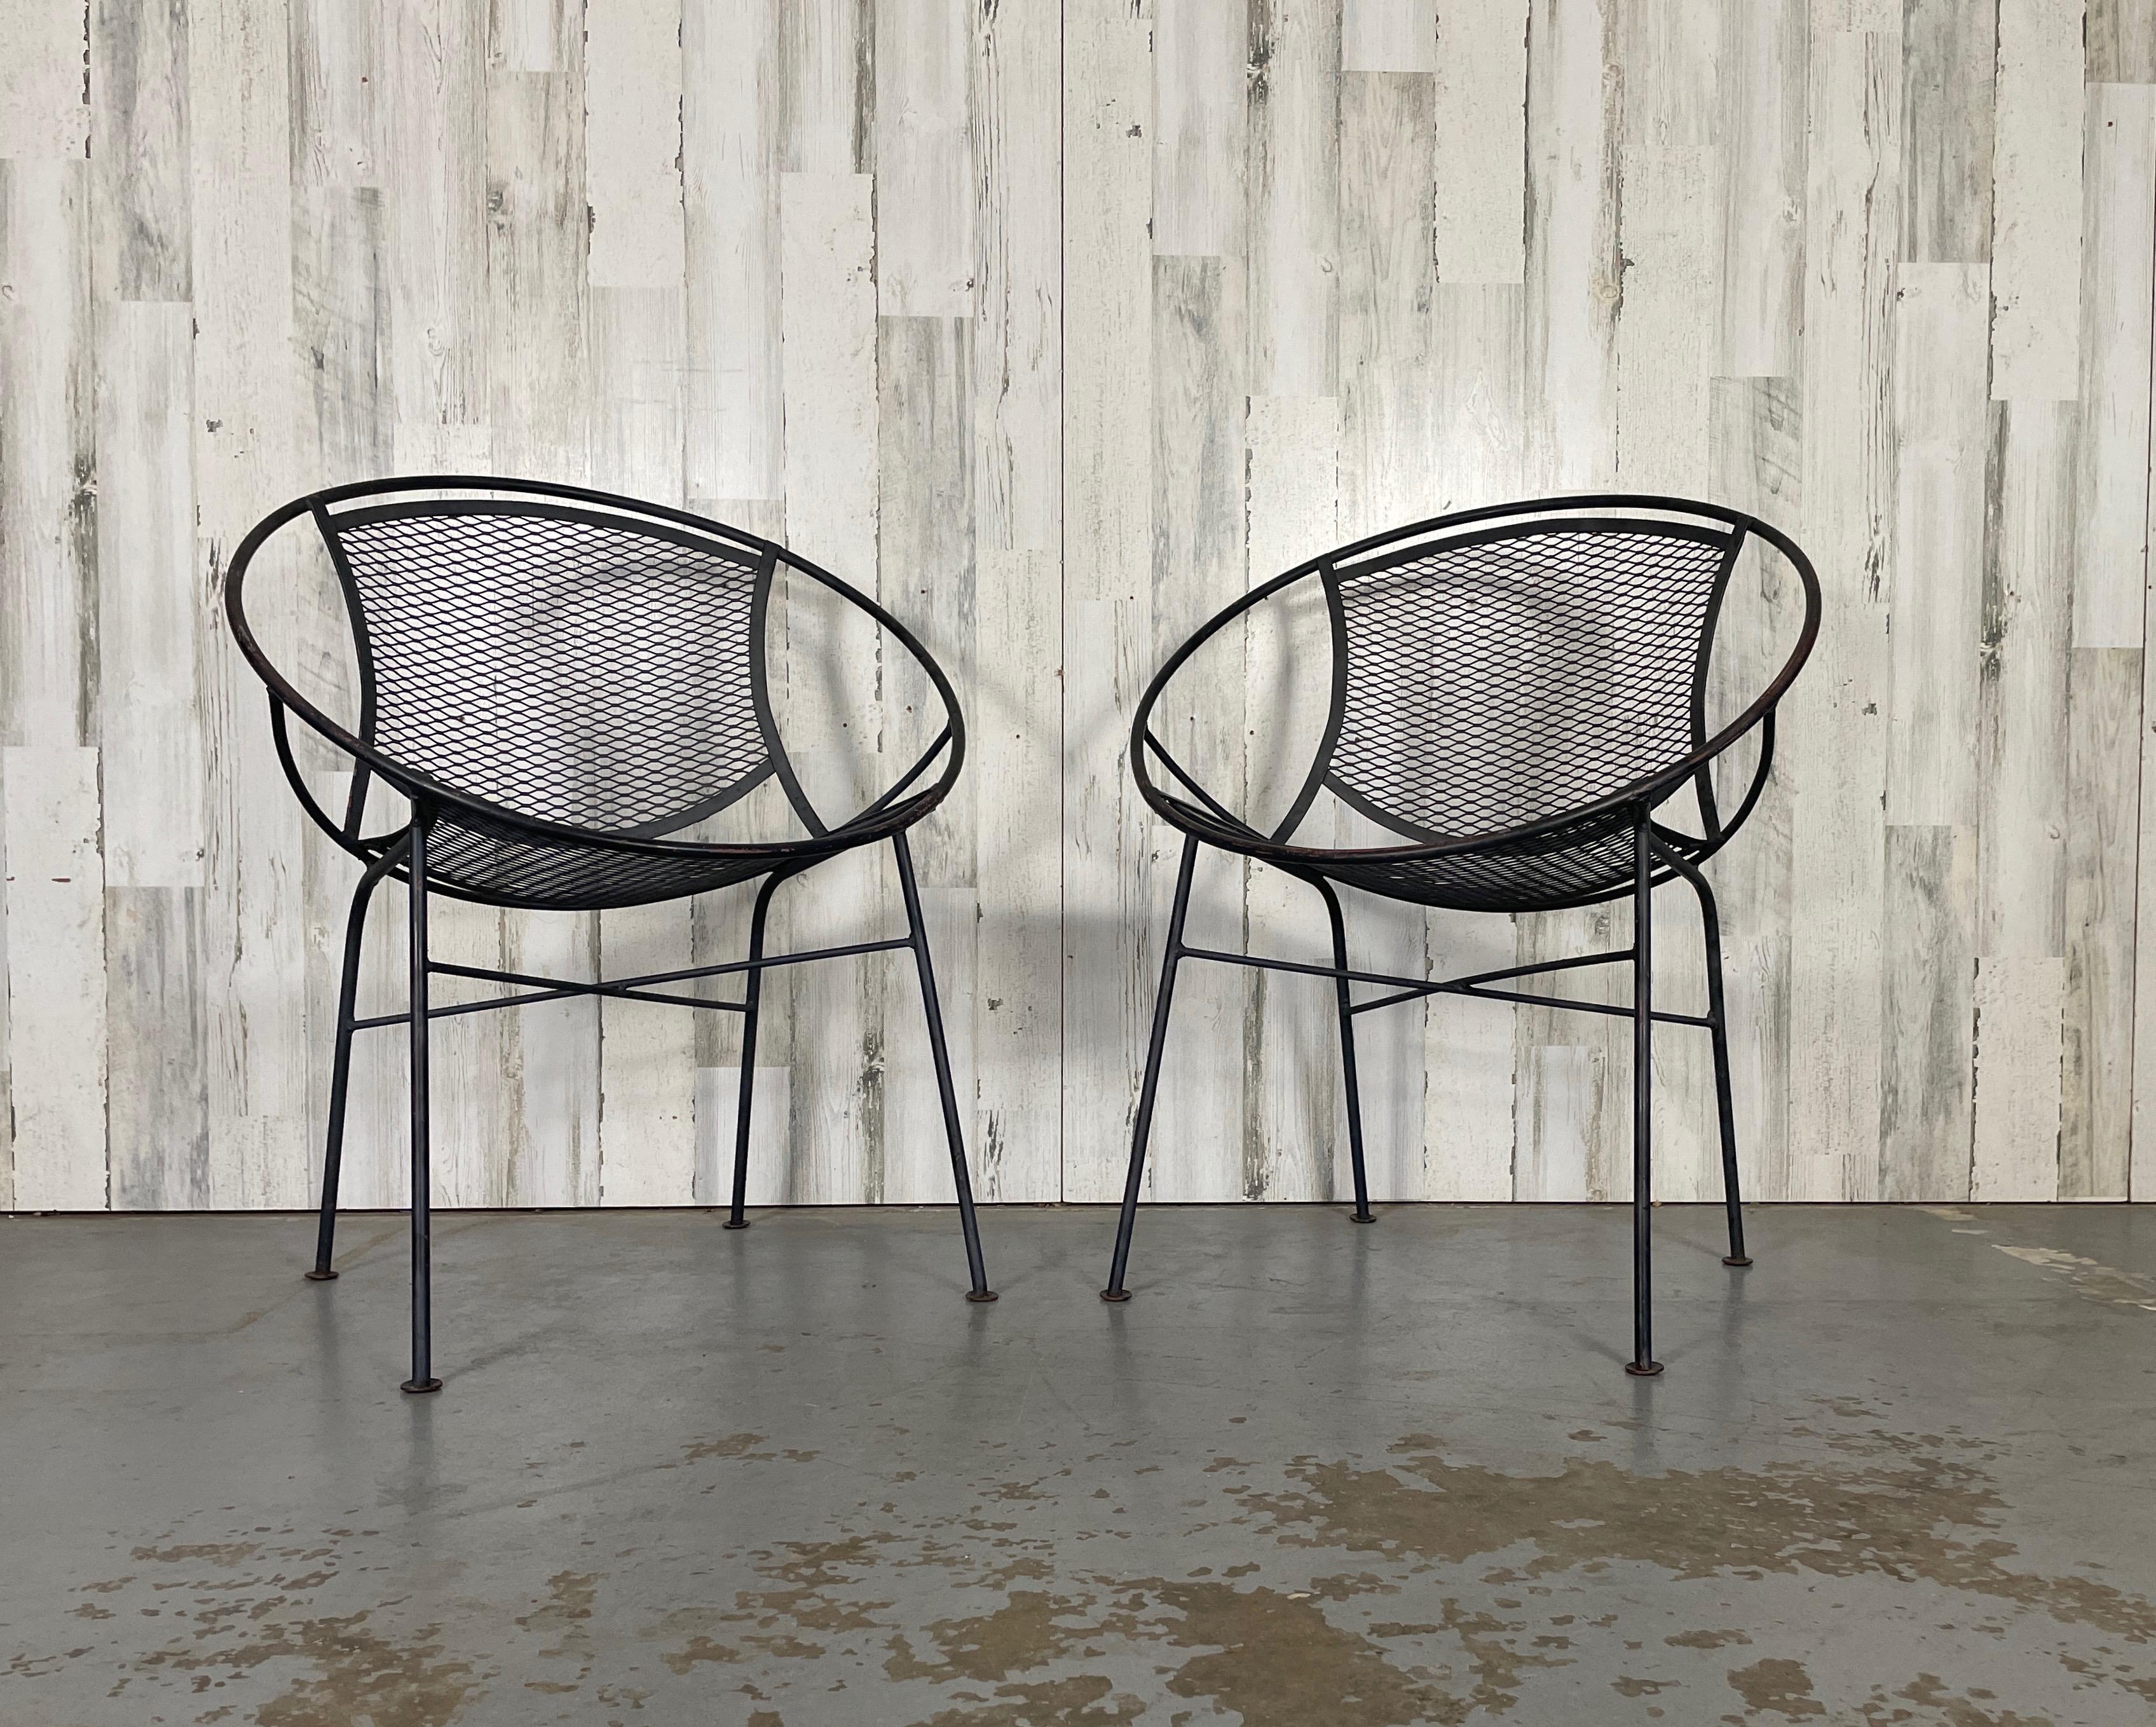 Petite Radar chairs in the style of Salterini- A pair. Great addition for a smaller garden/patio space.